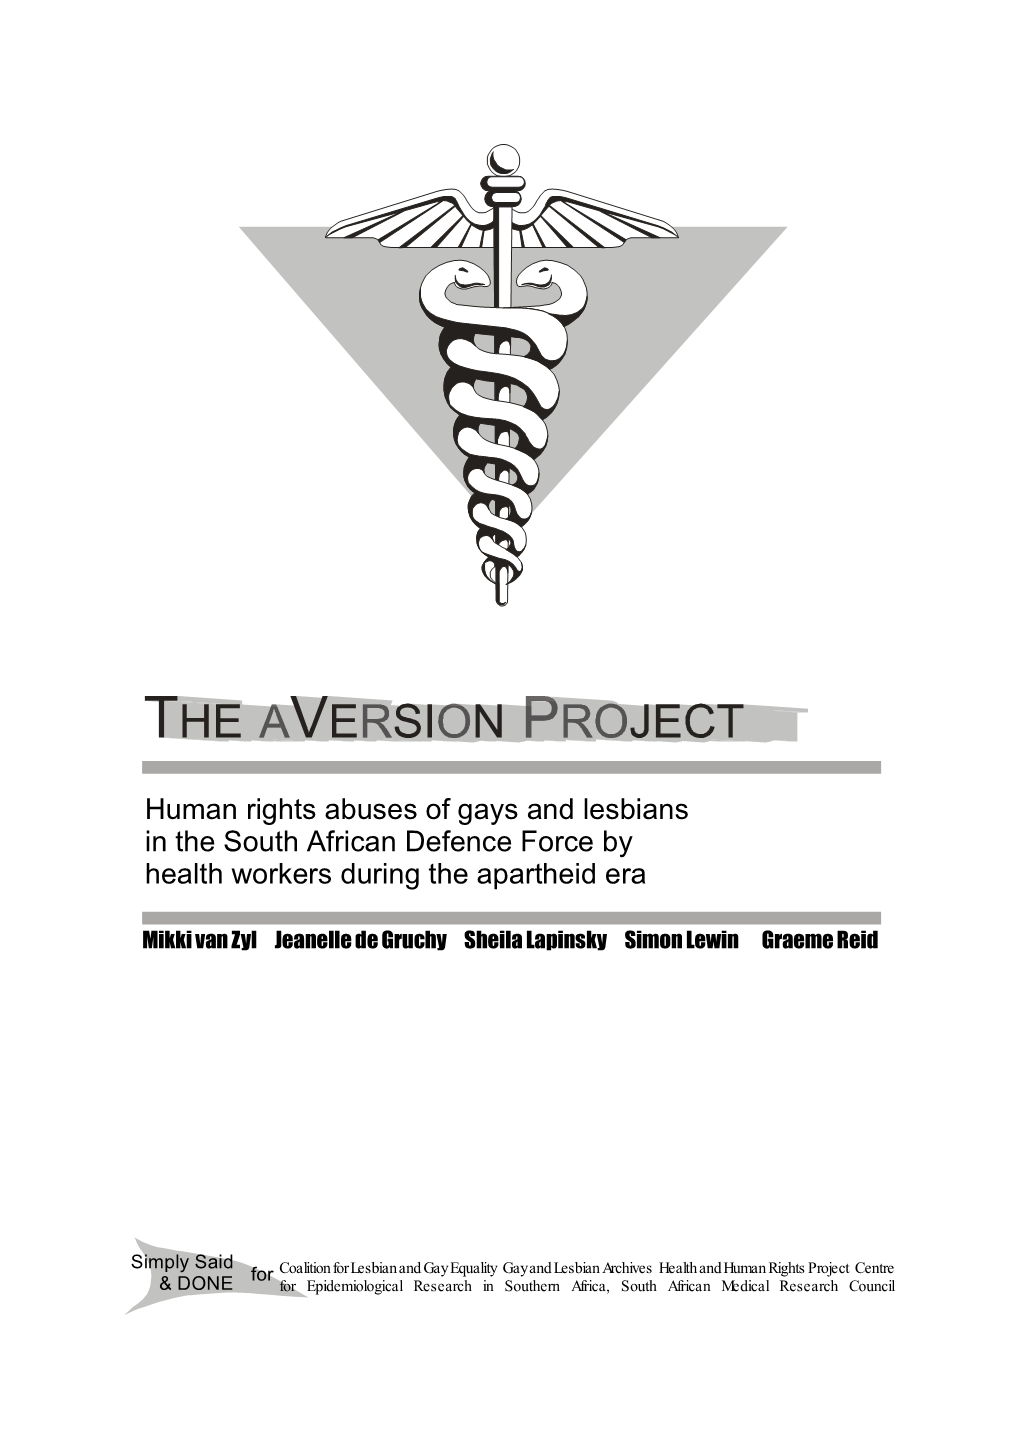 The Aversion Project: Human Rights Abuses of Gays and Lesbians in The